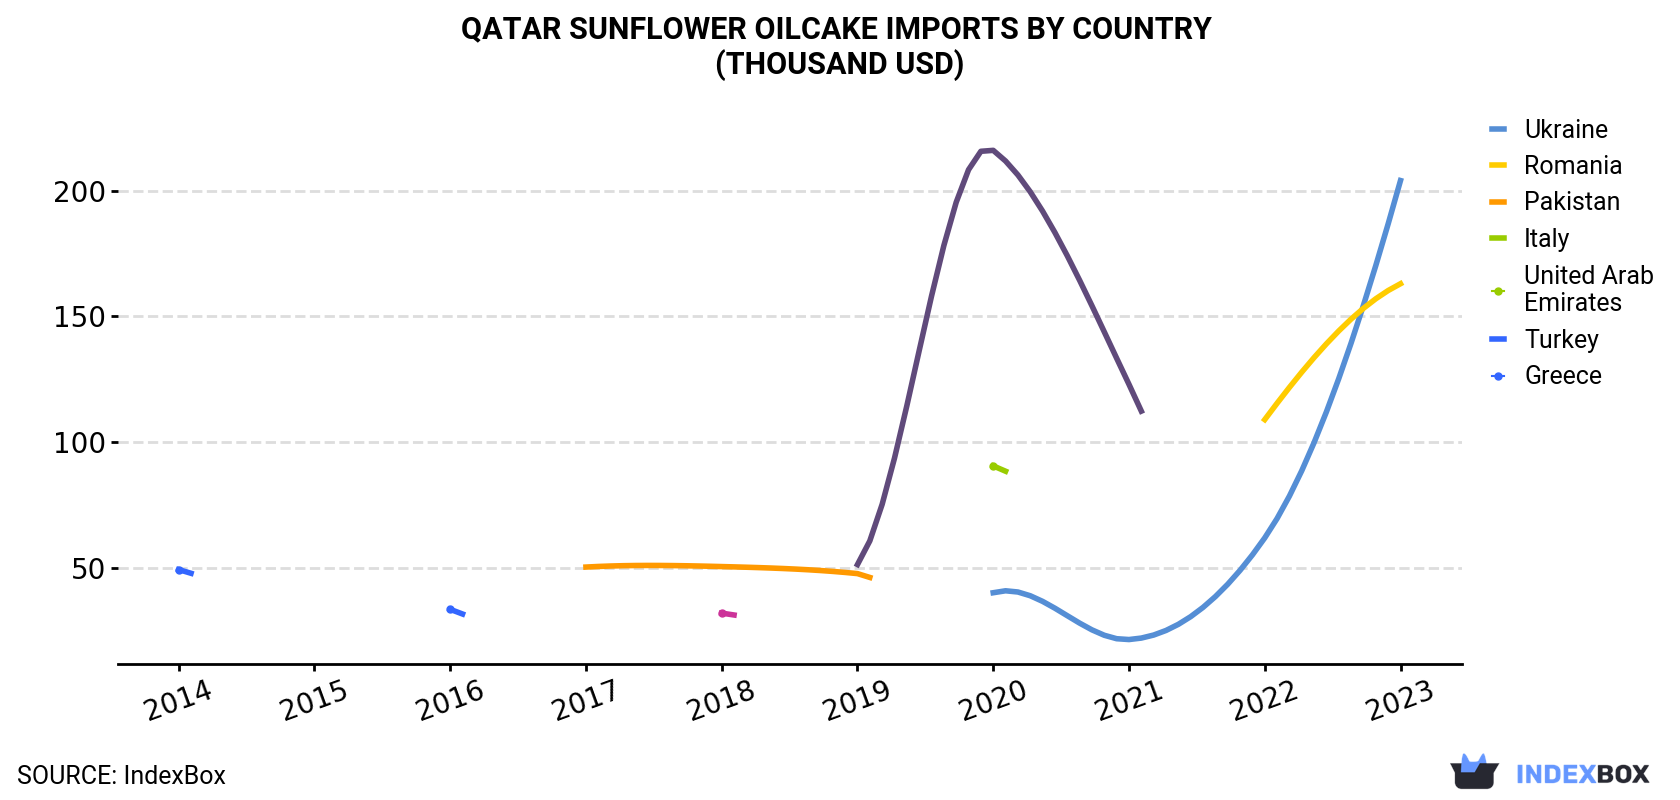 Qatar Sunflower Oilcake Imports By Country (Thousand USD)